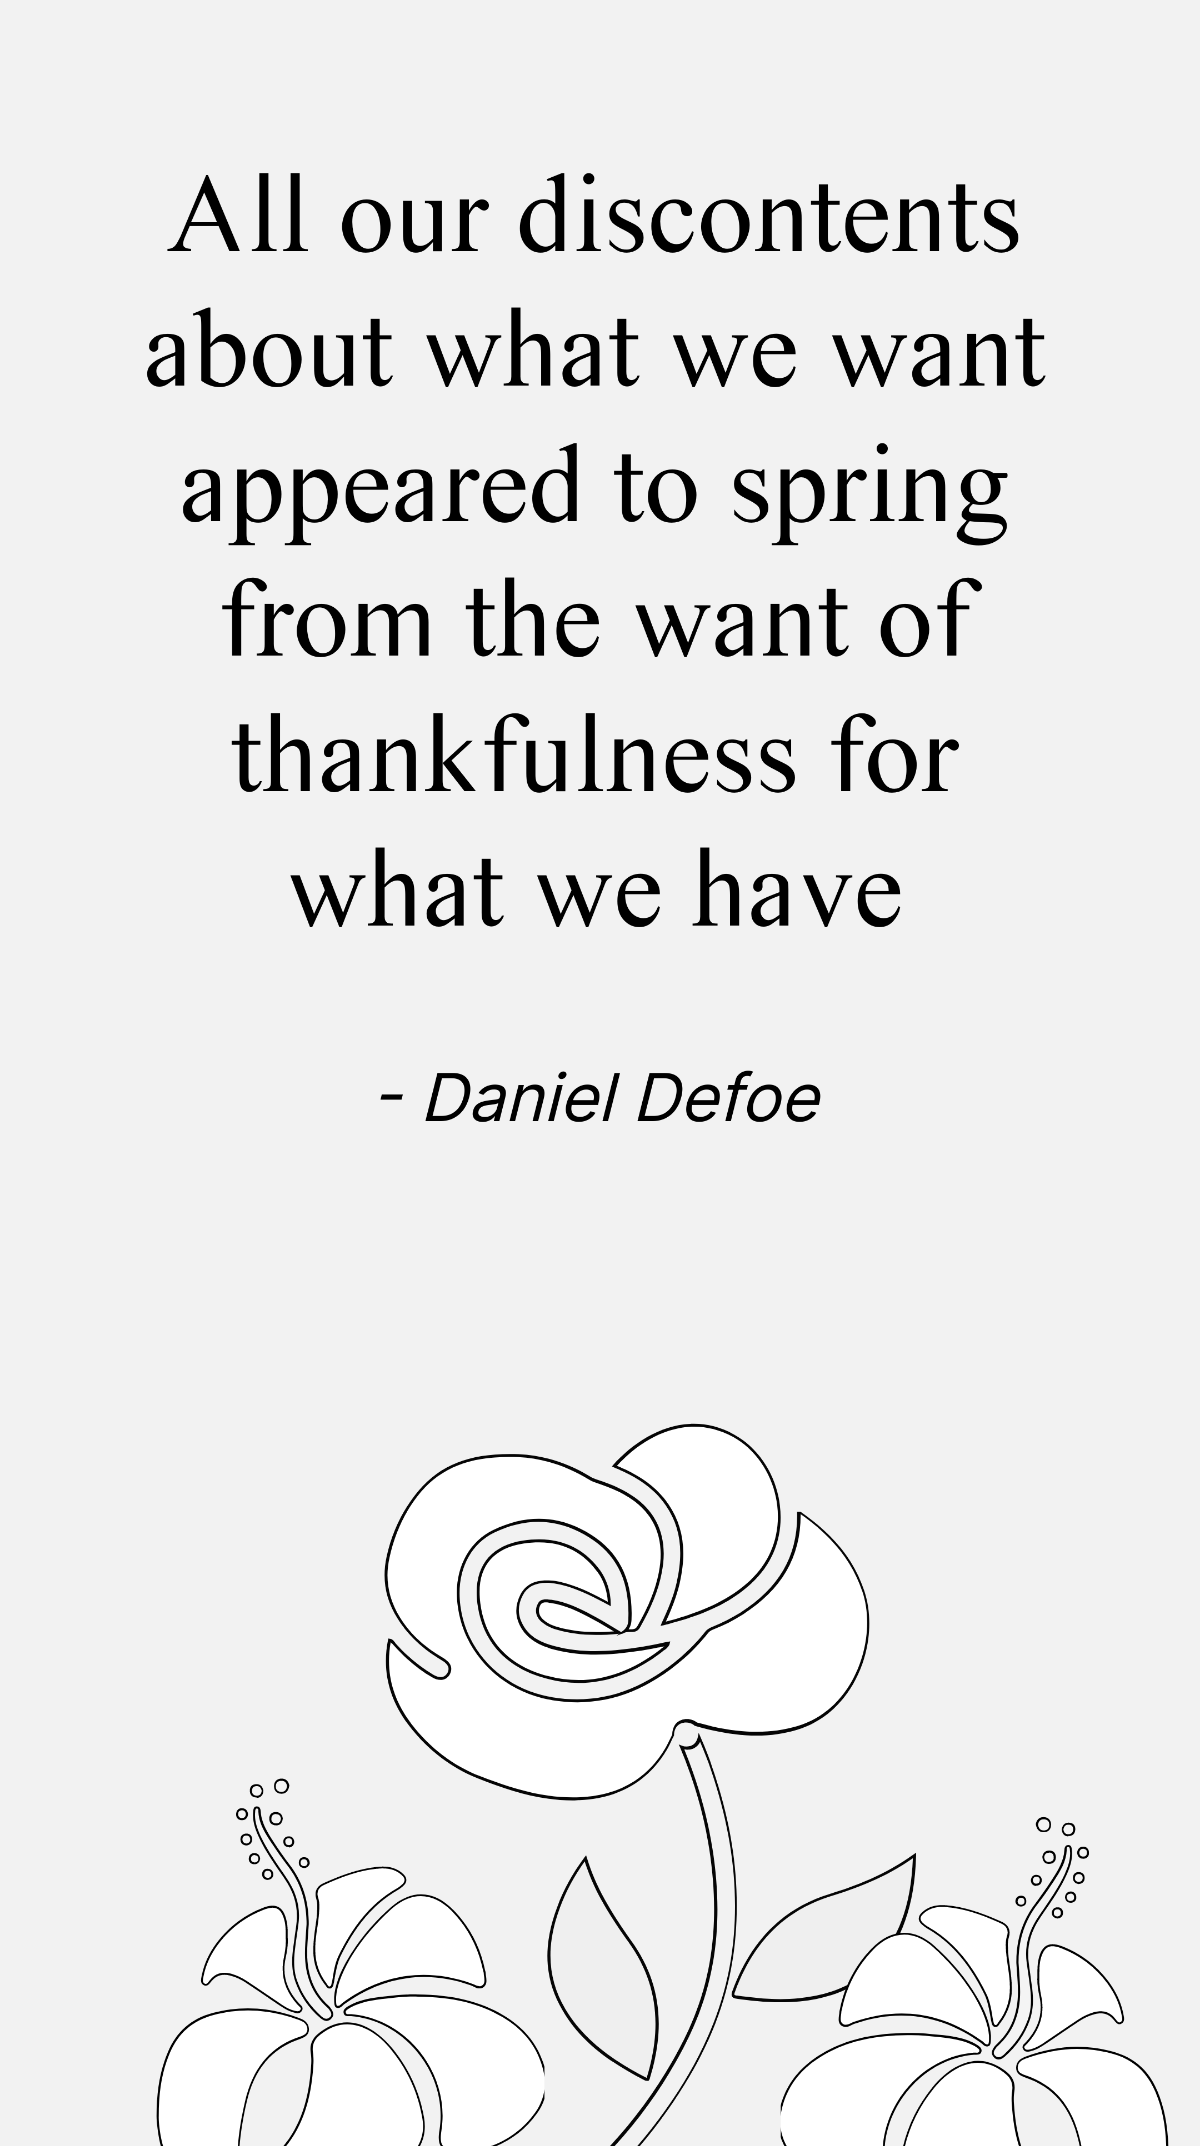 Daniel Defoe - All our discontents about what we want appeared to spring from the want of thankfulness for what we have